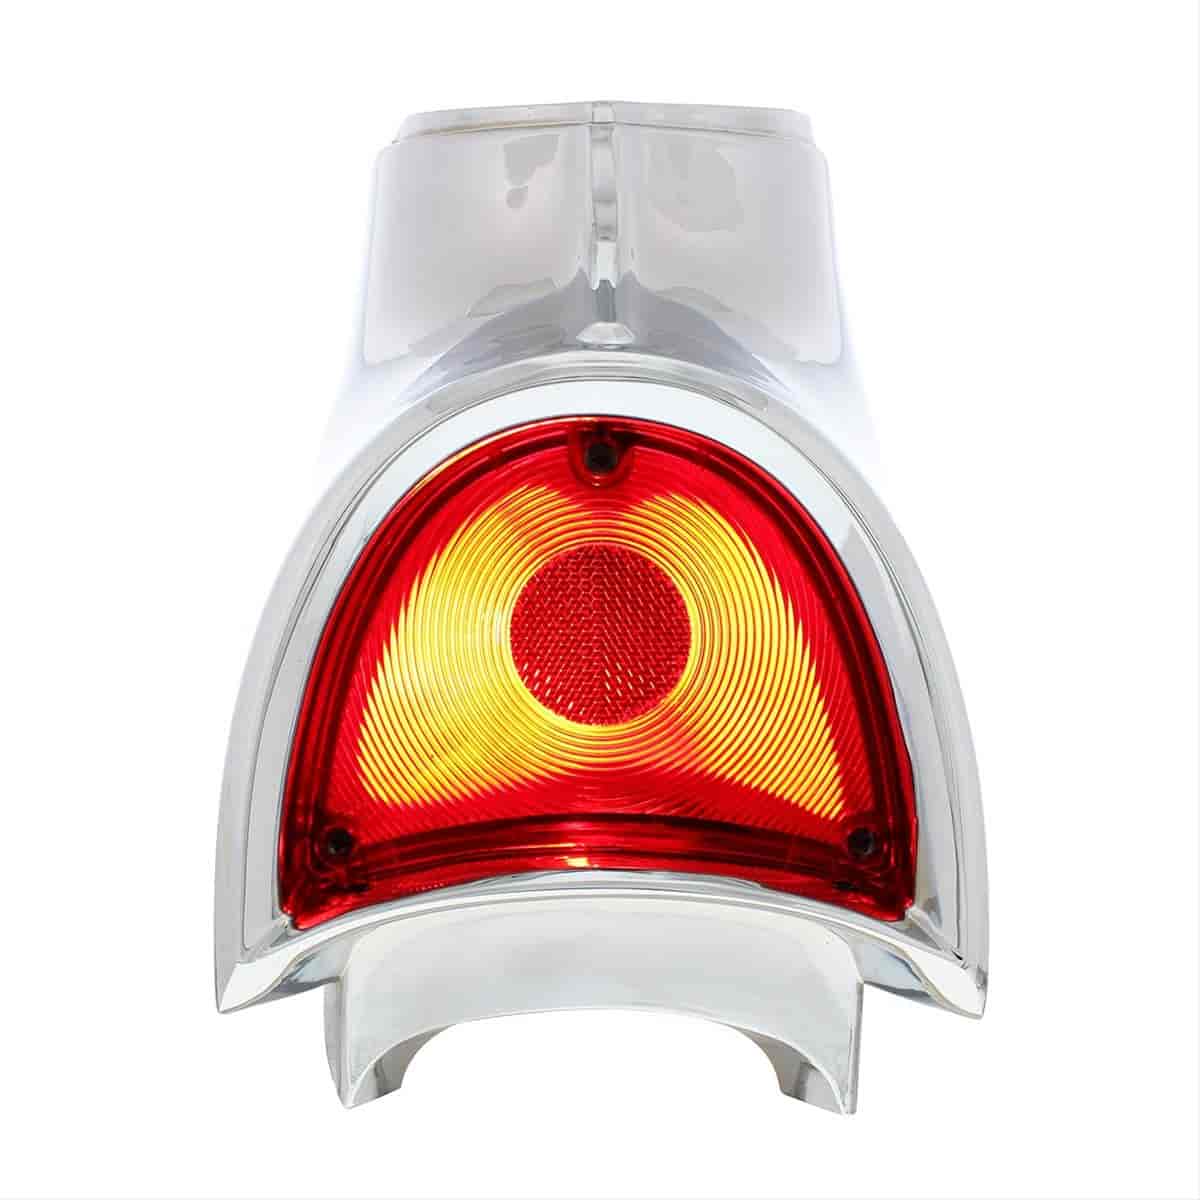 110182 Tail Light for 1957 CHEVY BEL AIR / 210 - Left/Driver